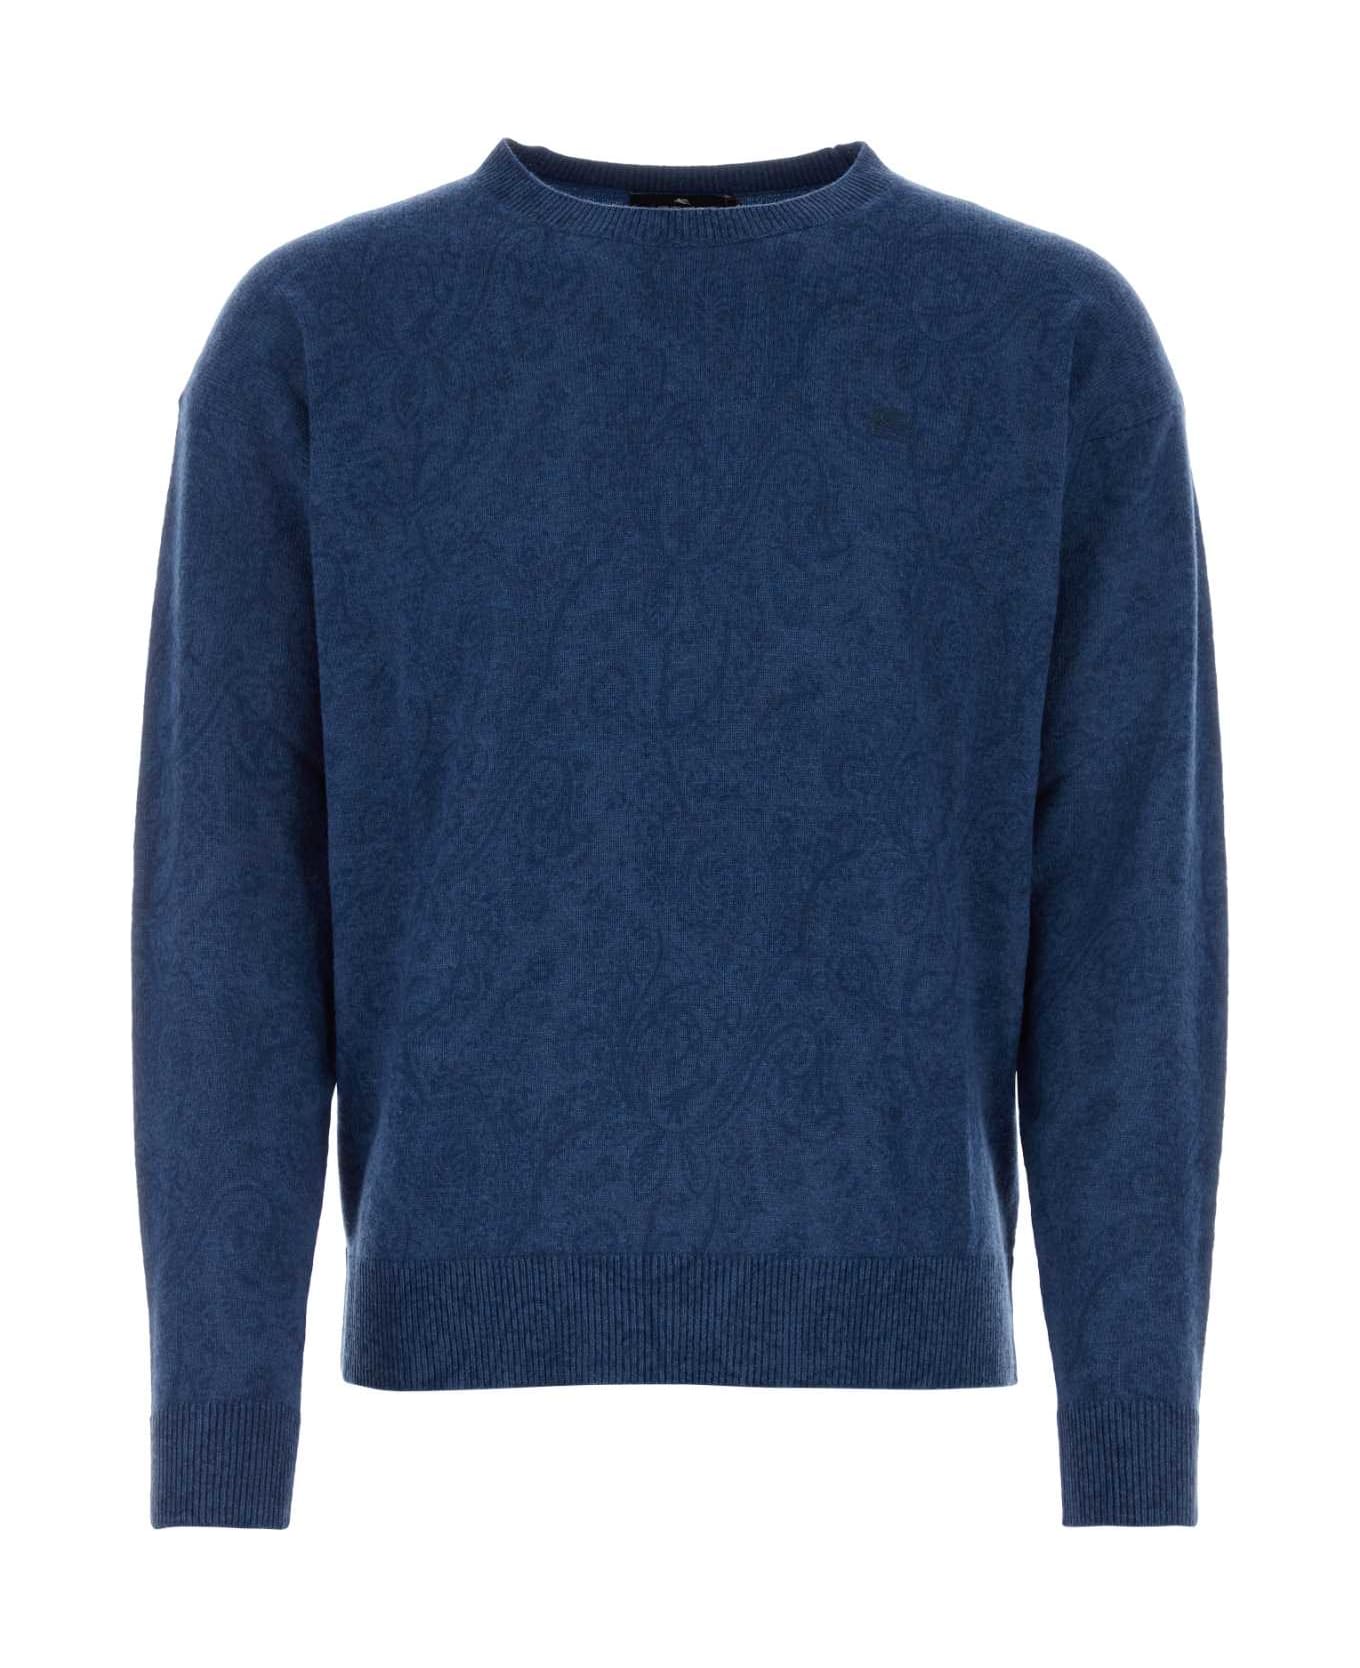 Etro Embroidered Wool Sweater - 200